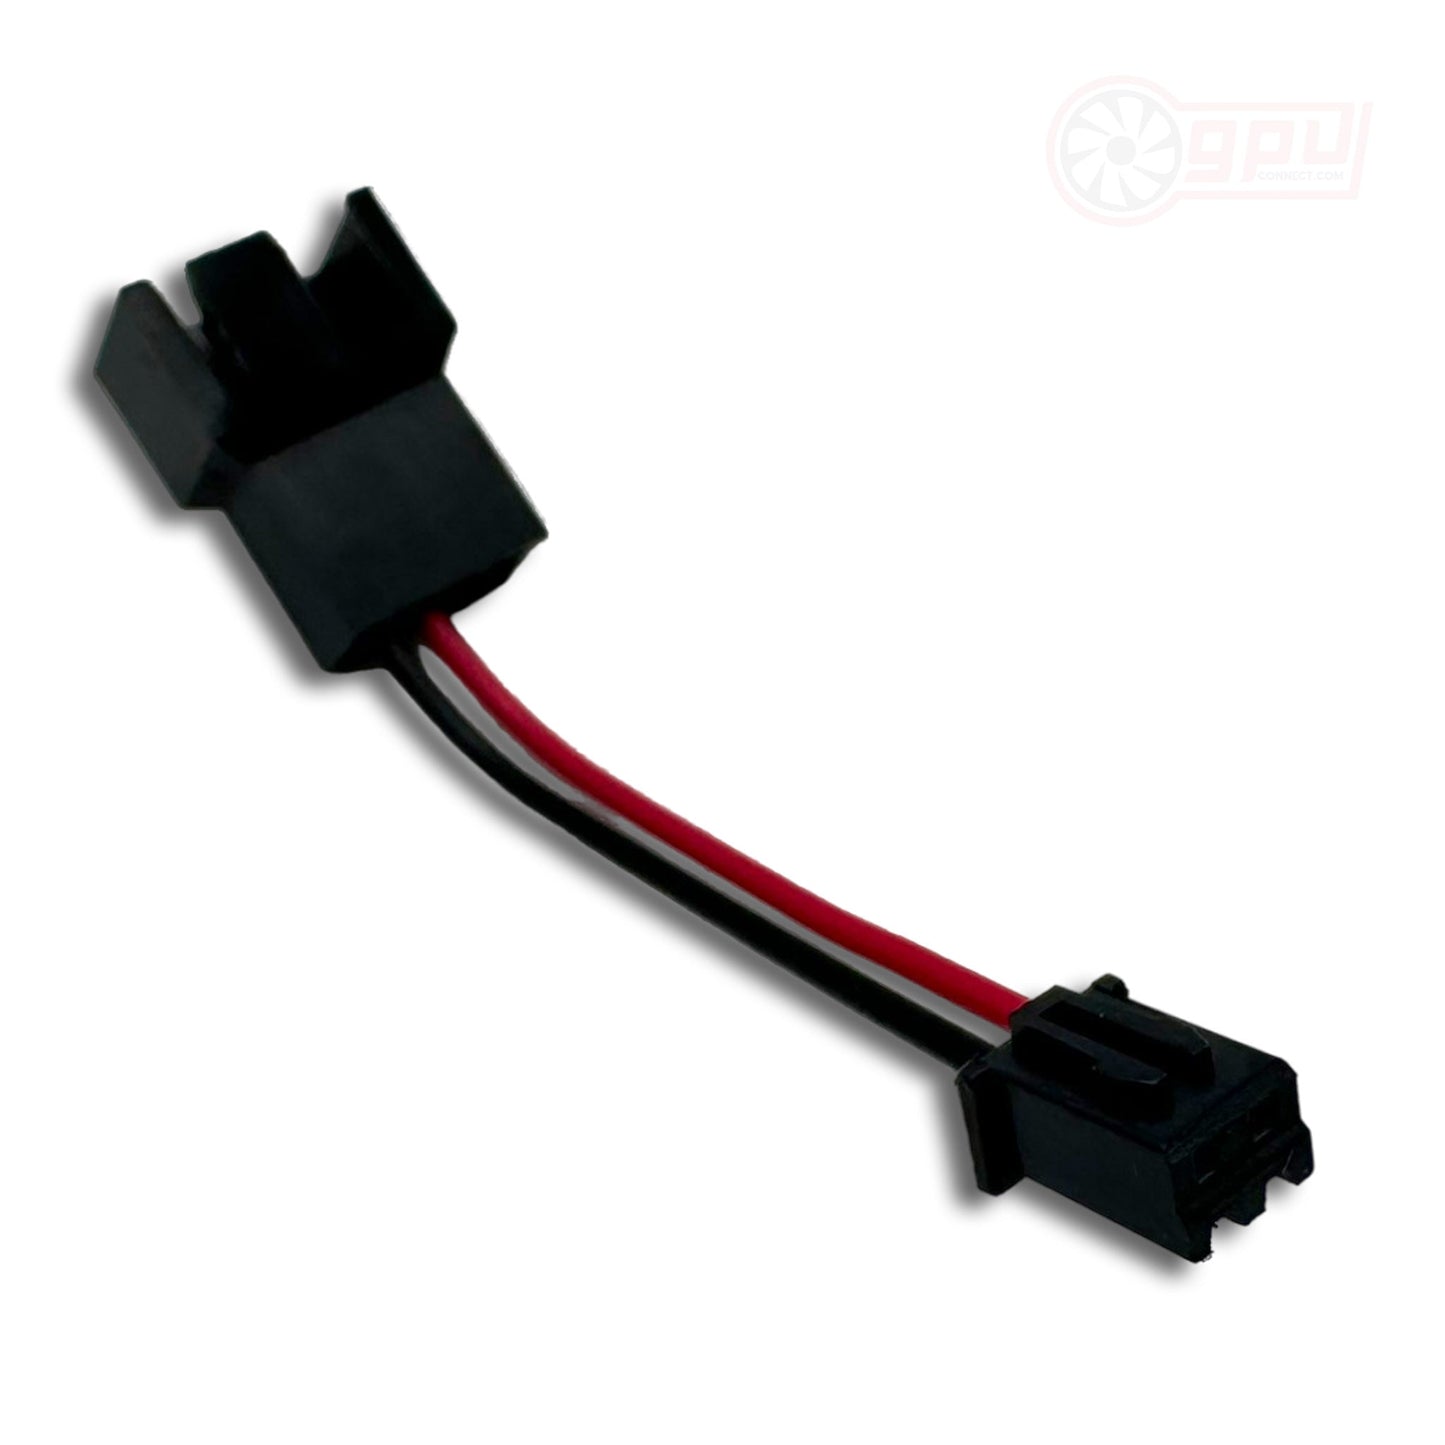 2-Pin to 4-Pin Fan Adapter Cable - JST XH 2.54mm - 5cm - GPUCONNECT.COM